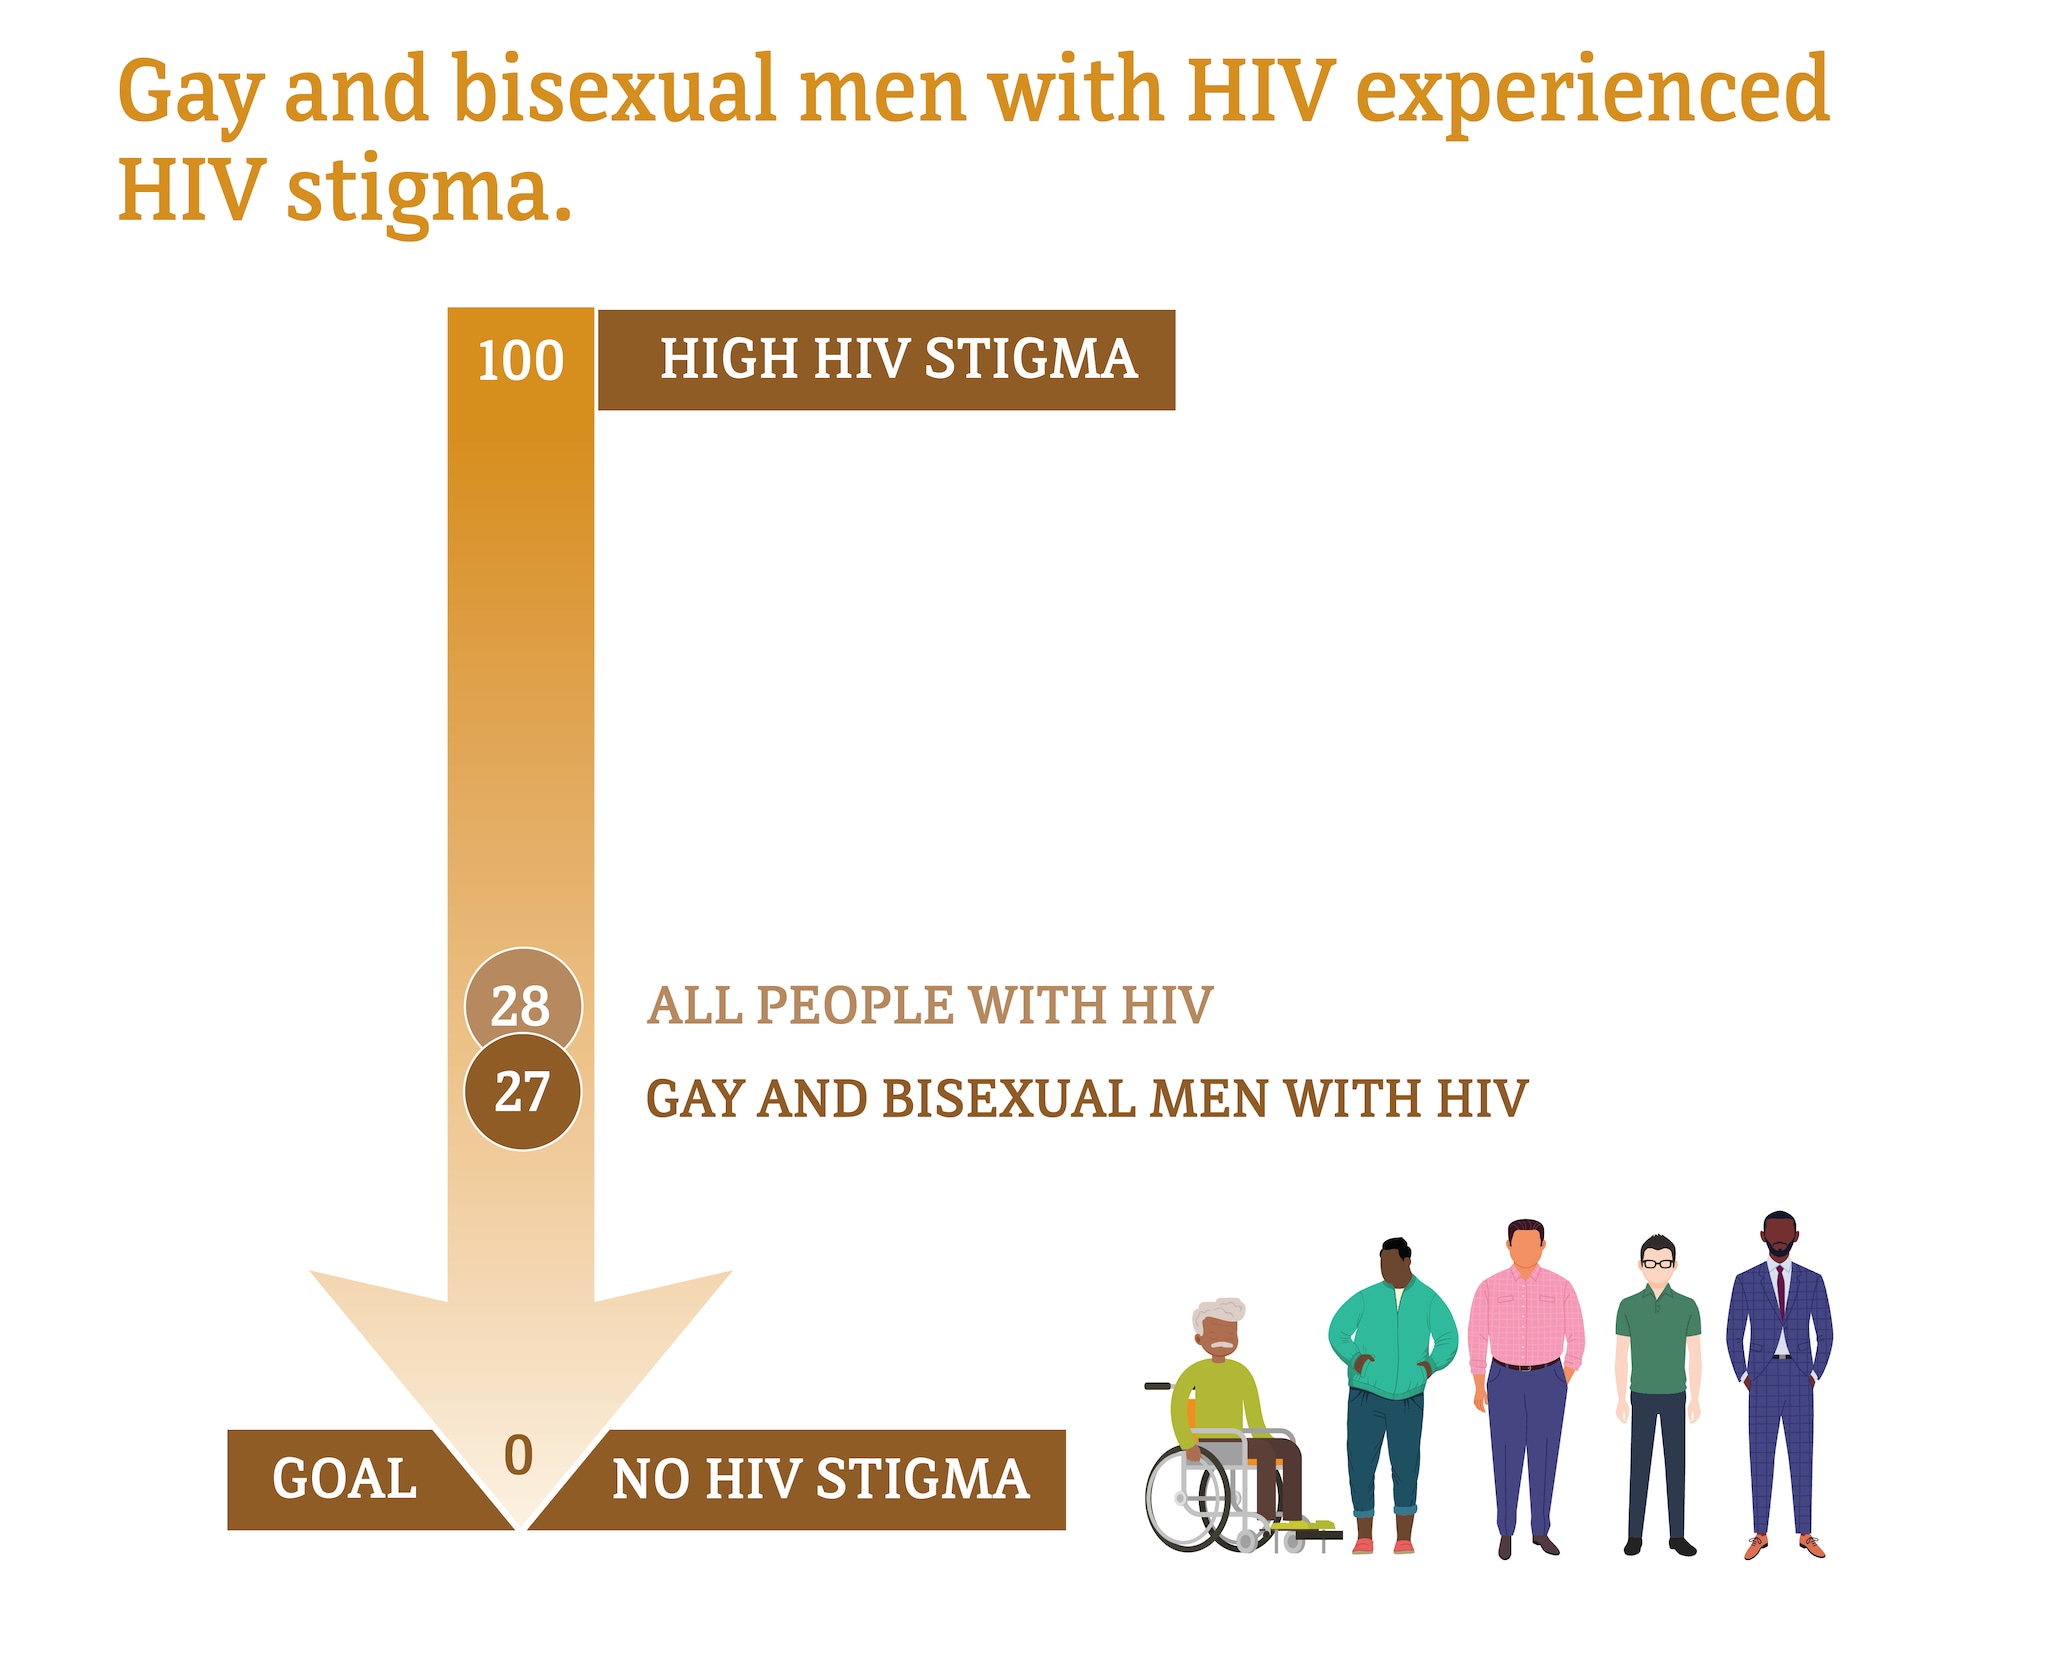 Viral Suppression Hiv And Gay And Bisexual Men Hiv By Group Hiv Aids Cdc